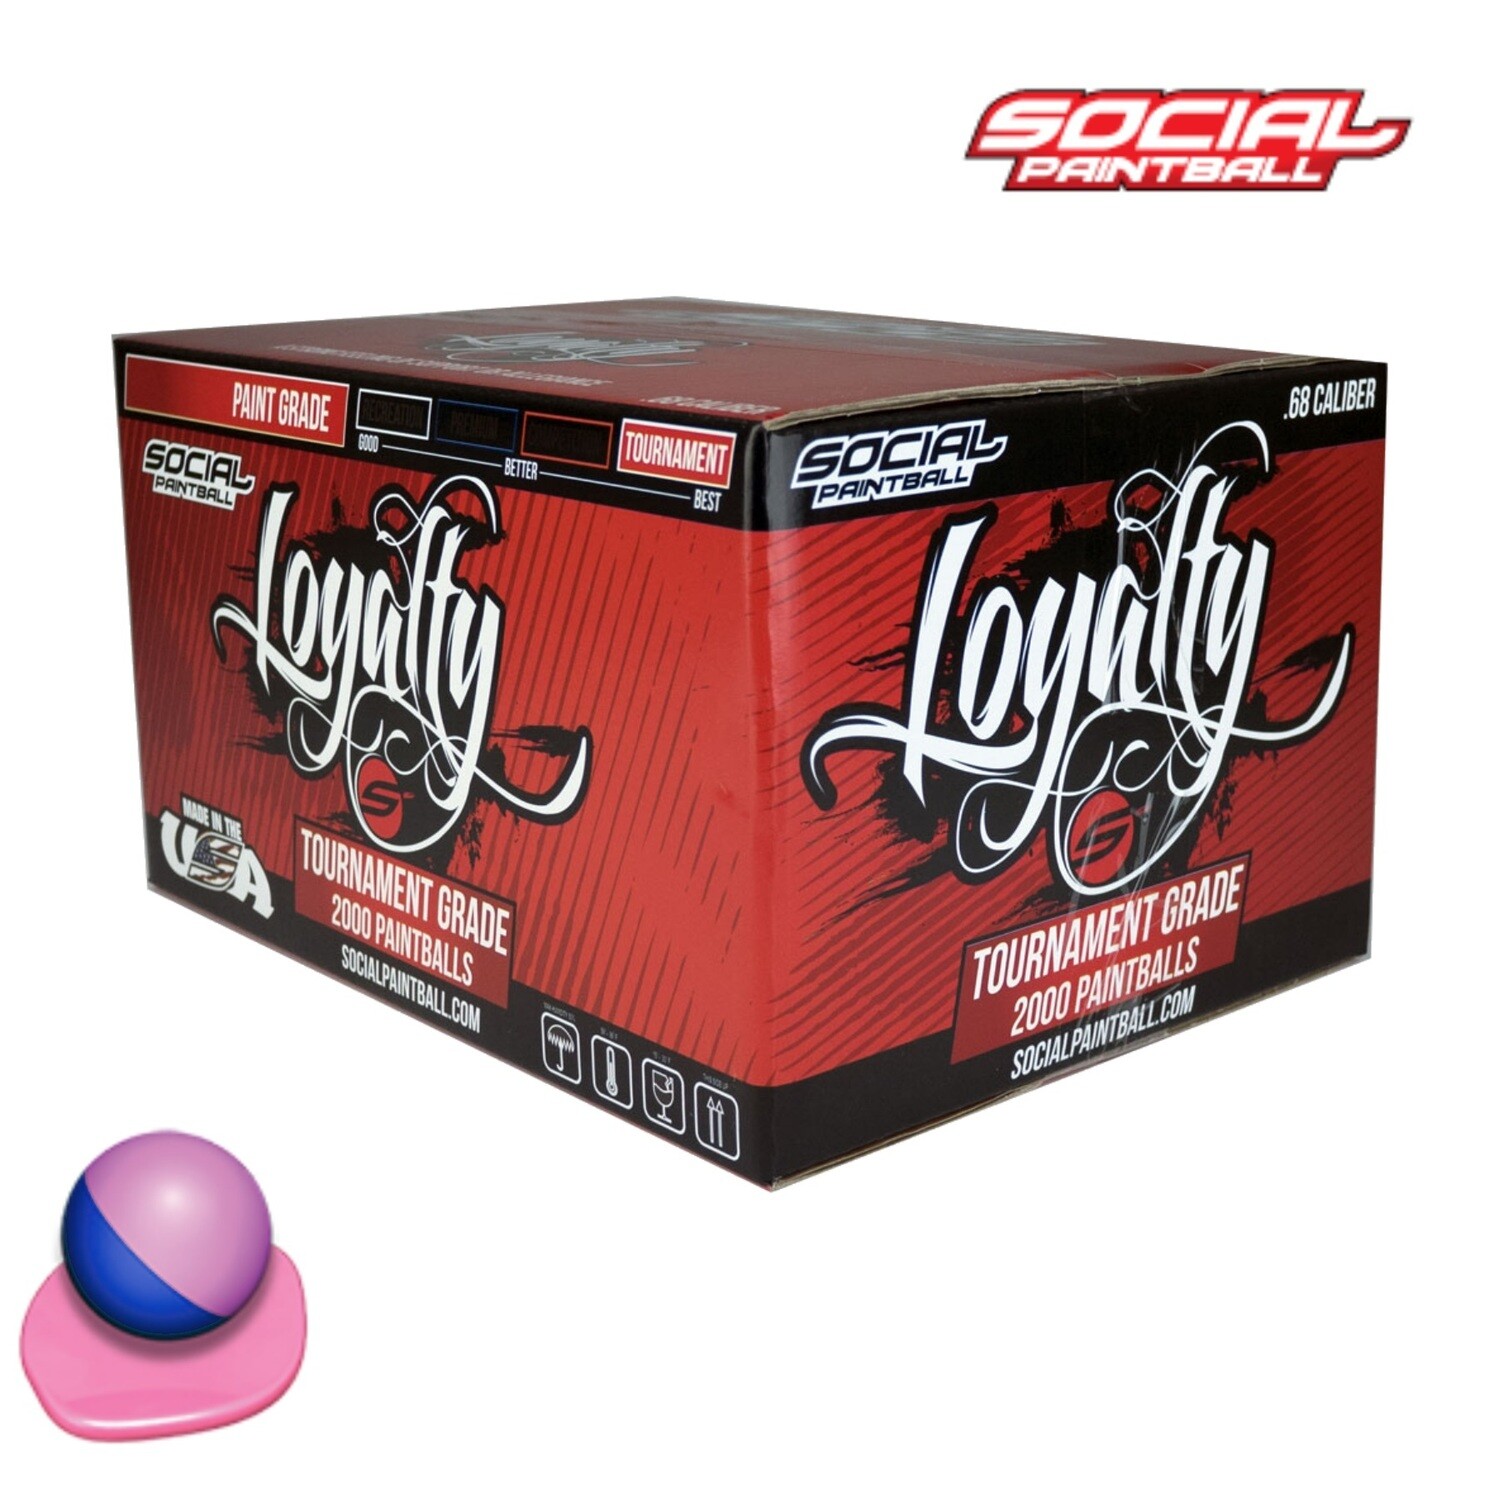 Social Paintball Loyalty Pro .68 cal Paintballs - Case of 2000 Rds - Pink/Purple Shell - Pink Fill